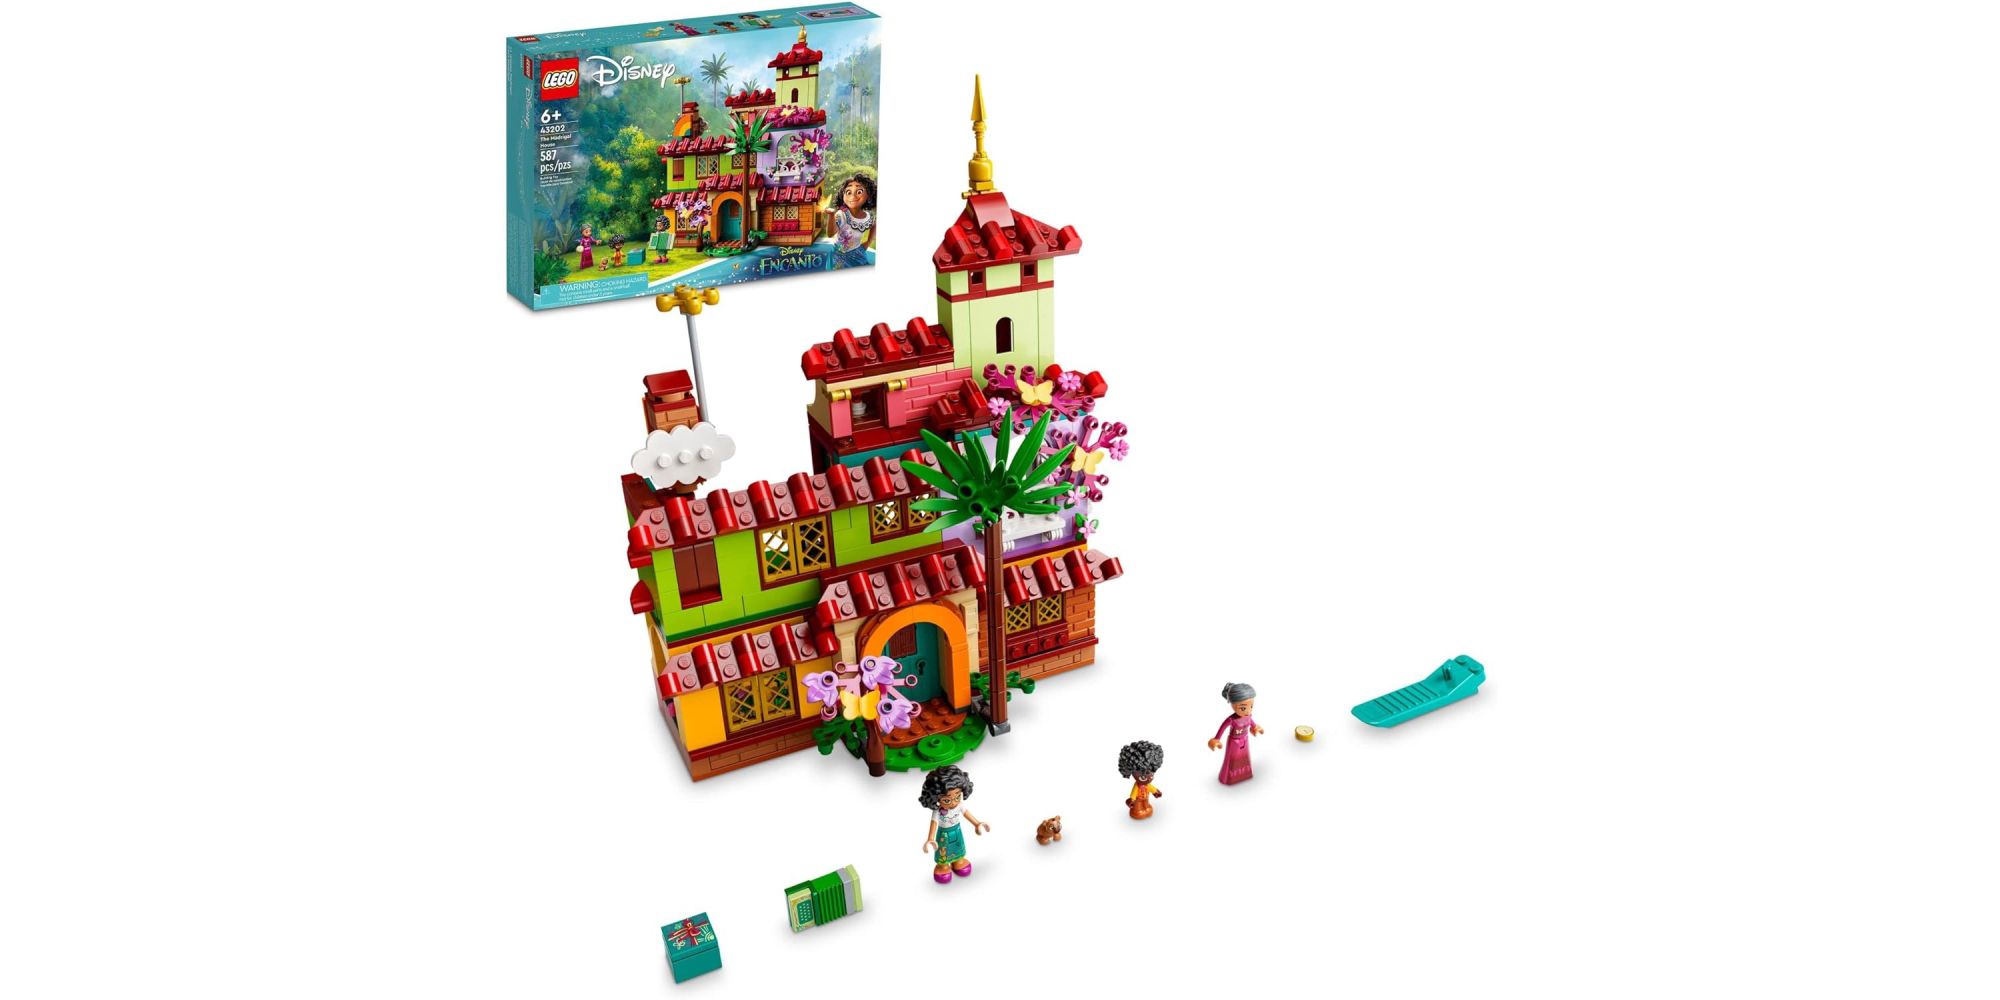 LEGO Disney's Encanto Madrigal House featuring the Madrigal House, Mirabel, Abuela Alma, and Antonio